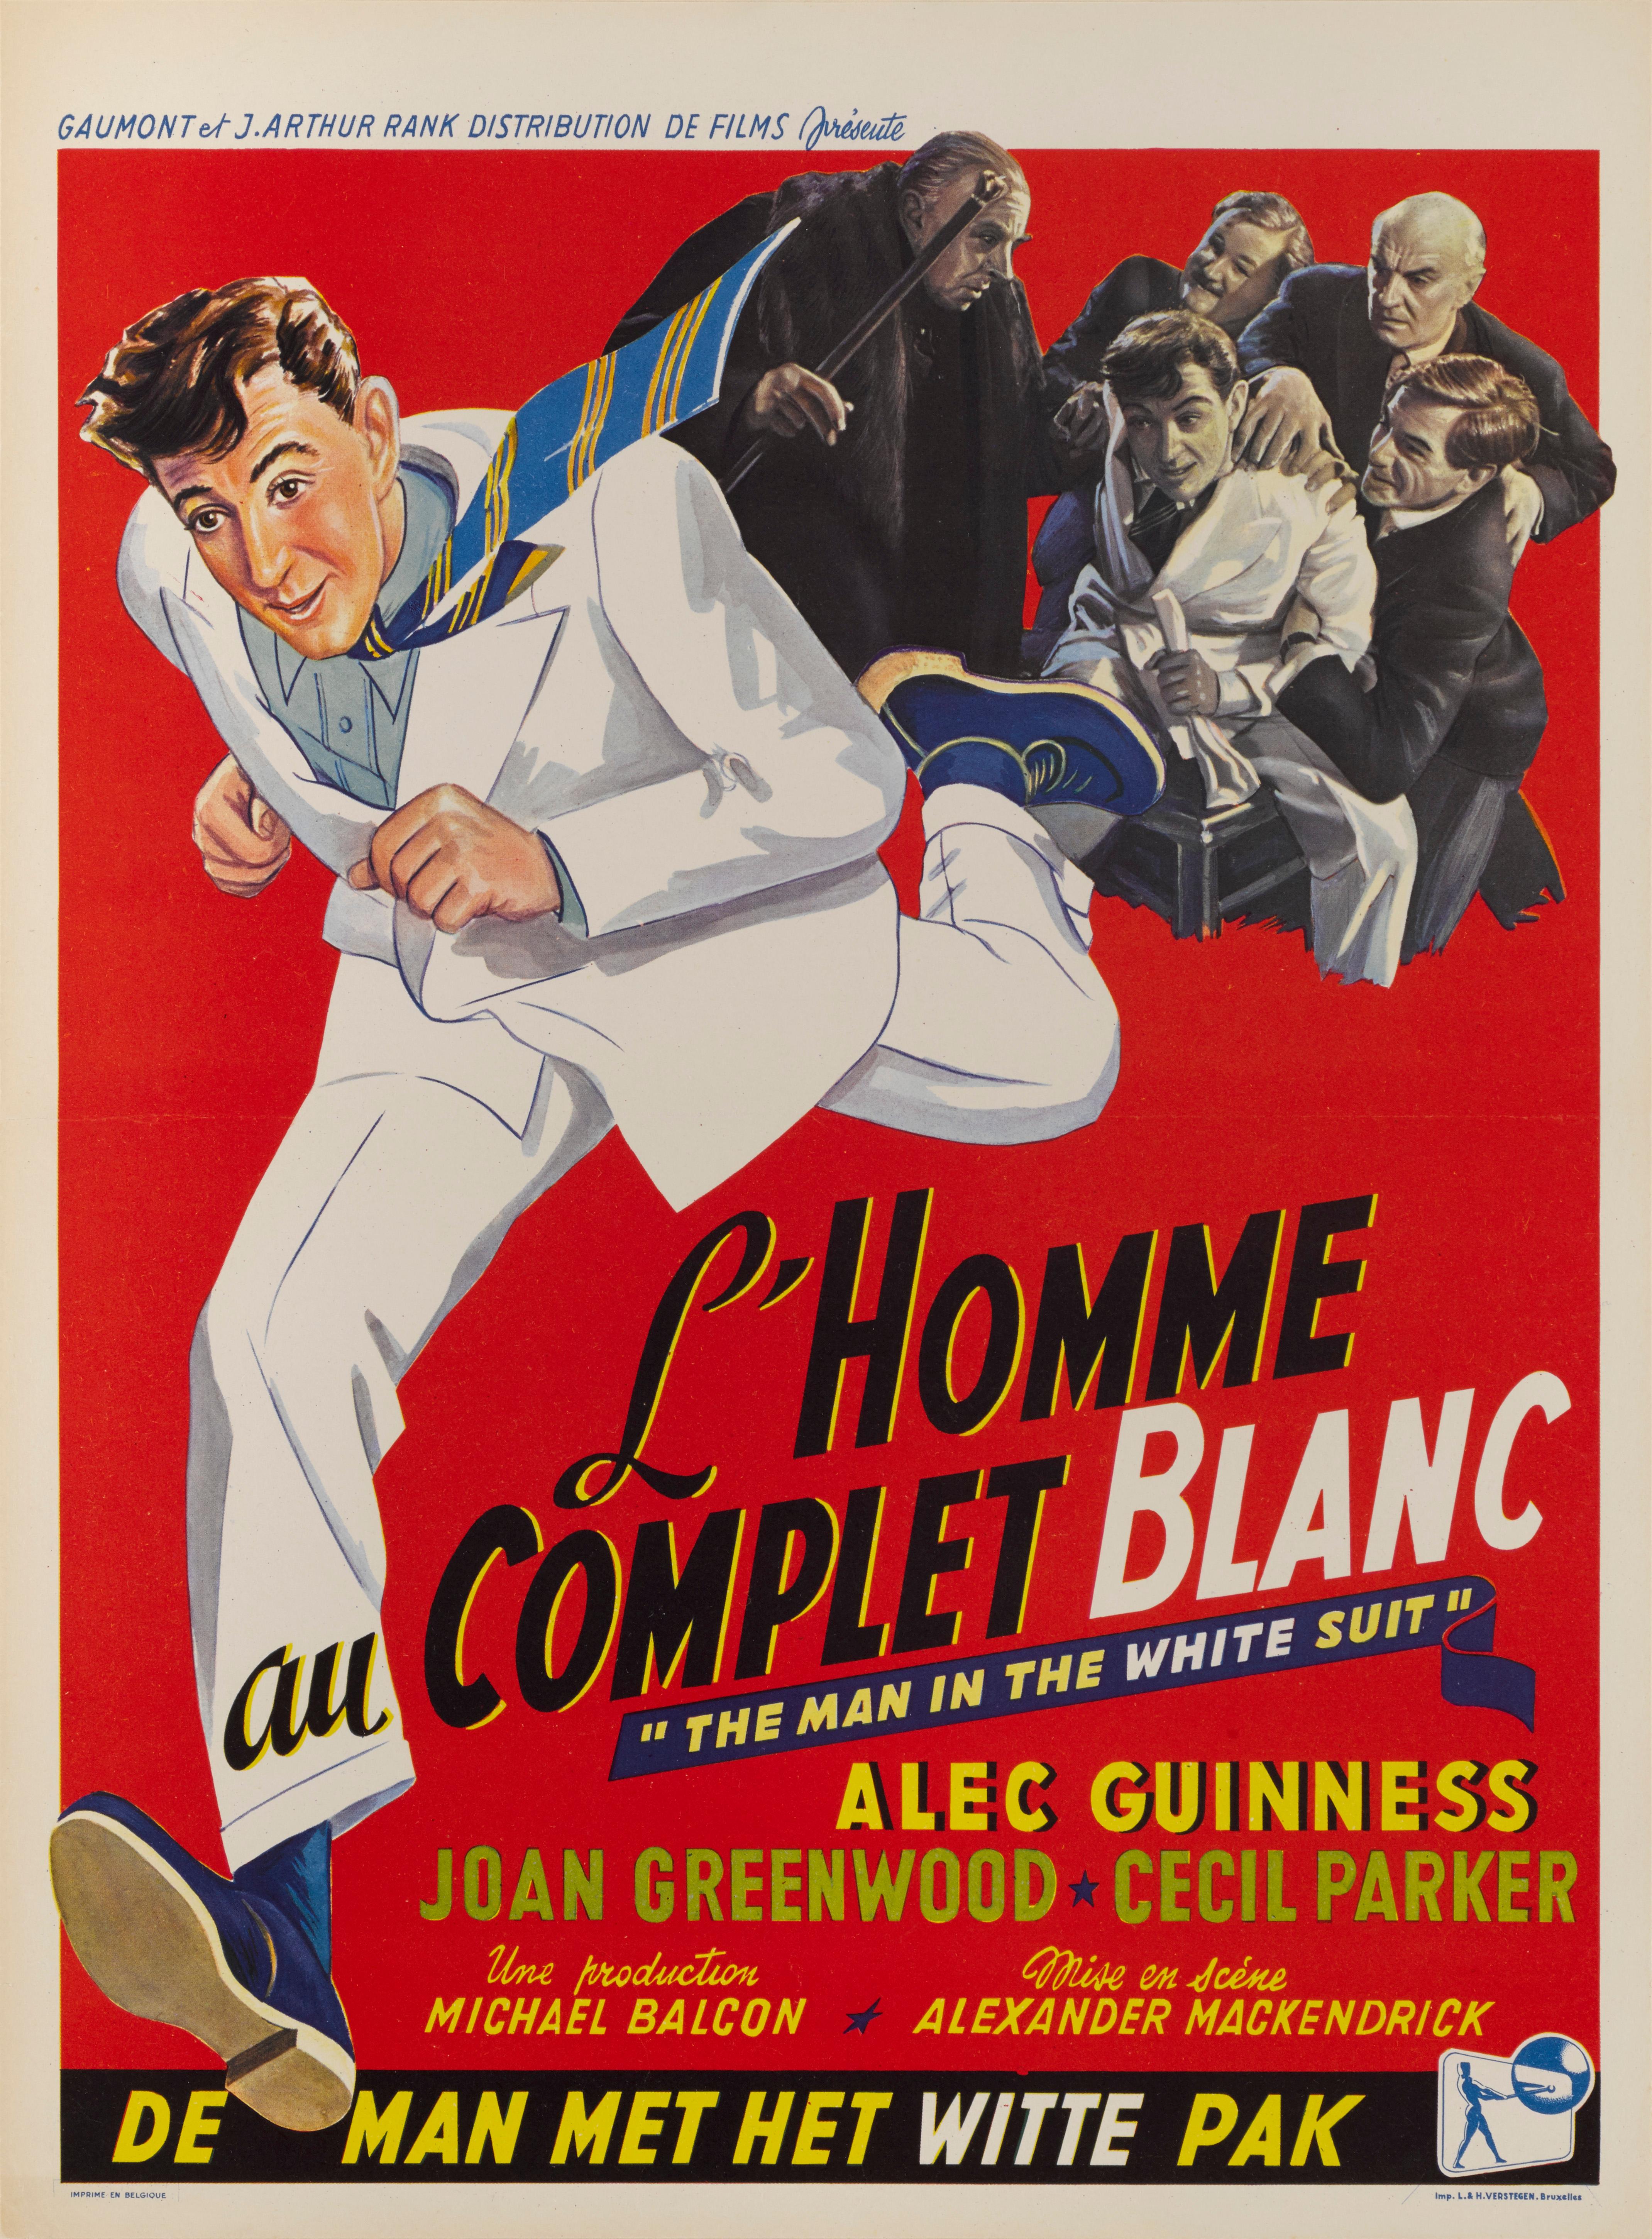 Belgian The Man in the White Suit  / L' Homme au Complet Blanc